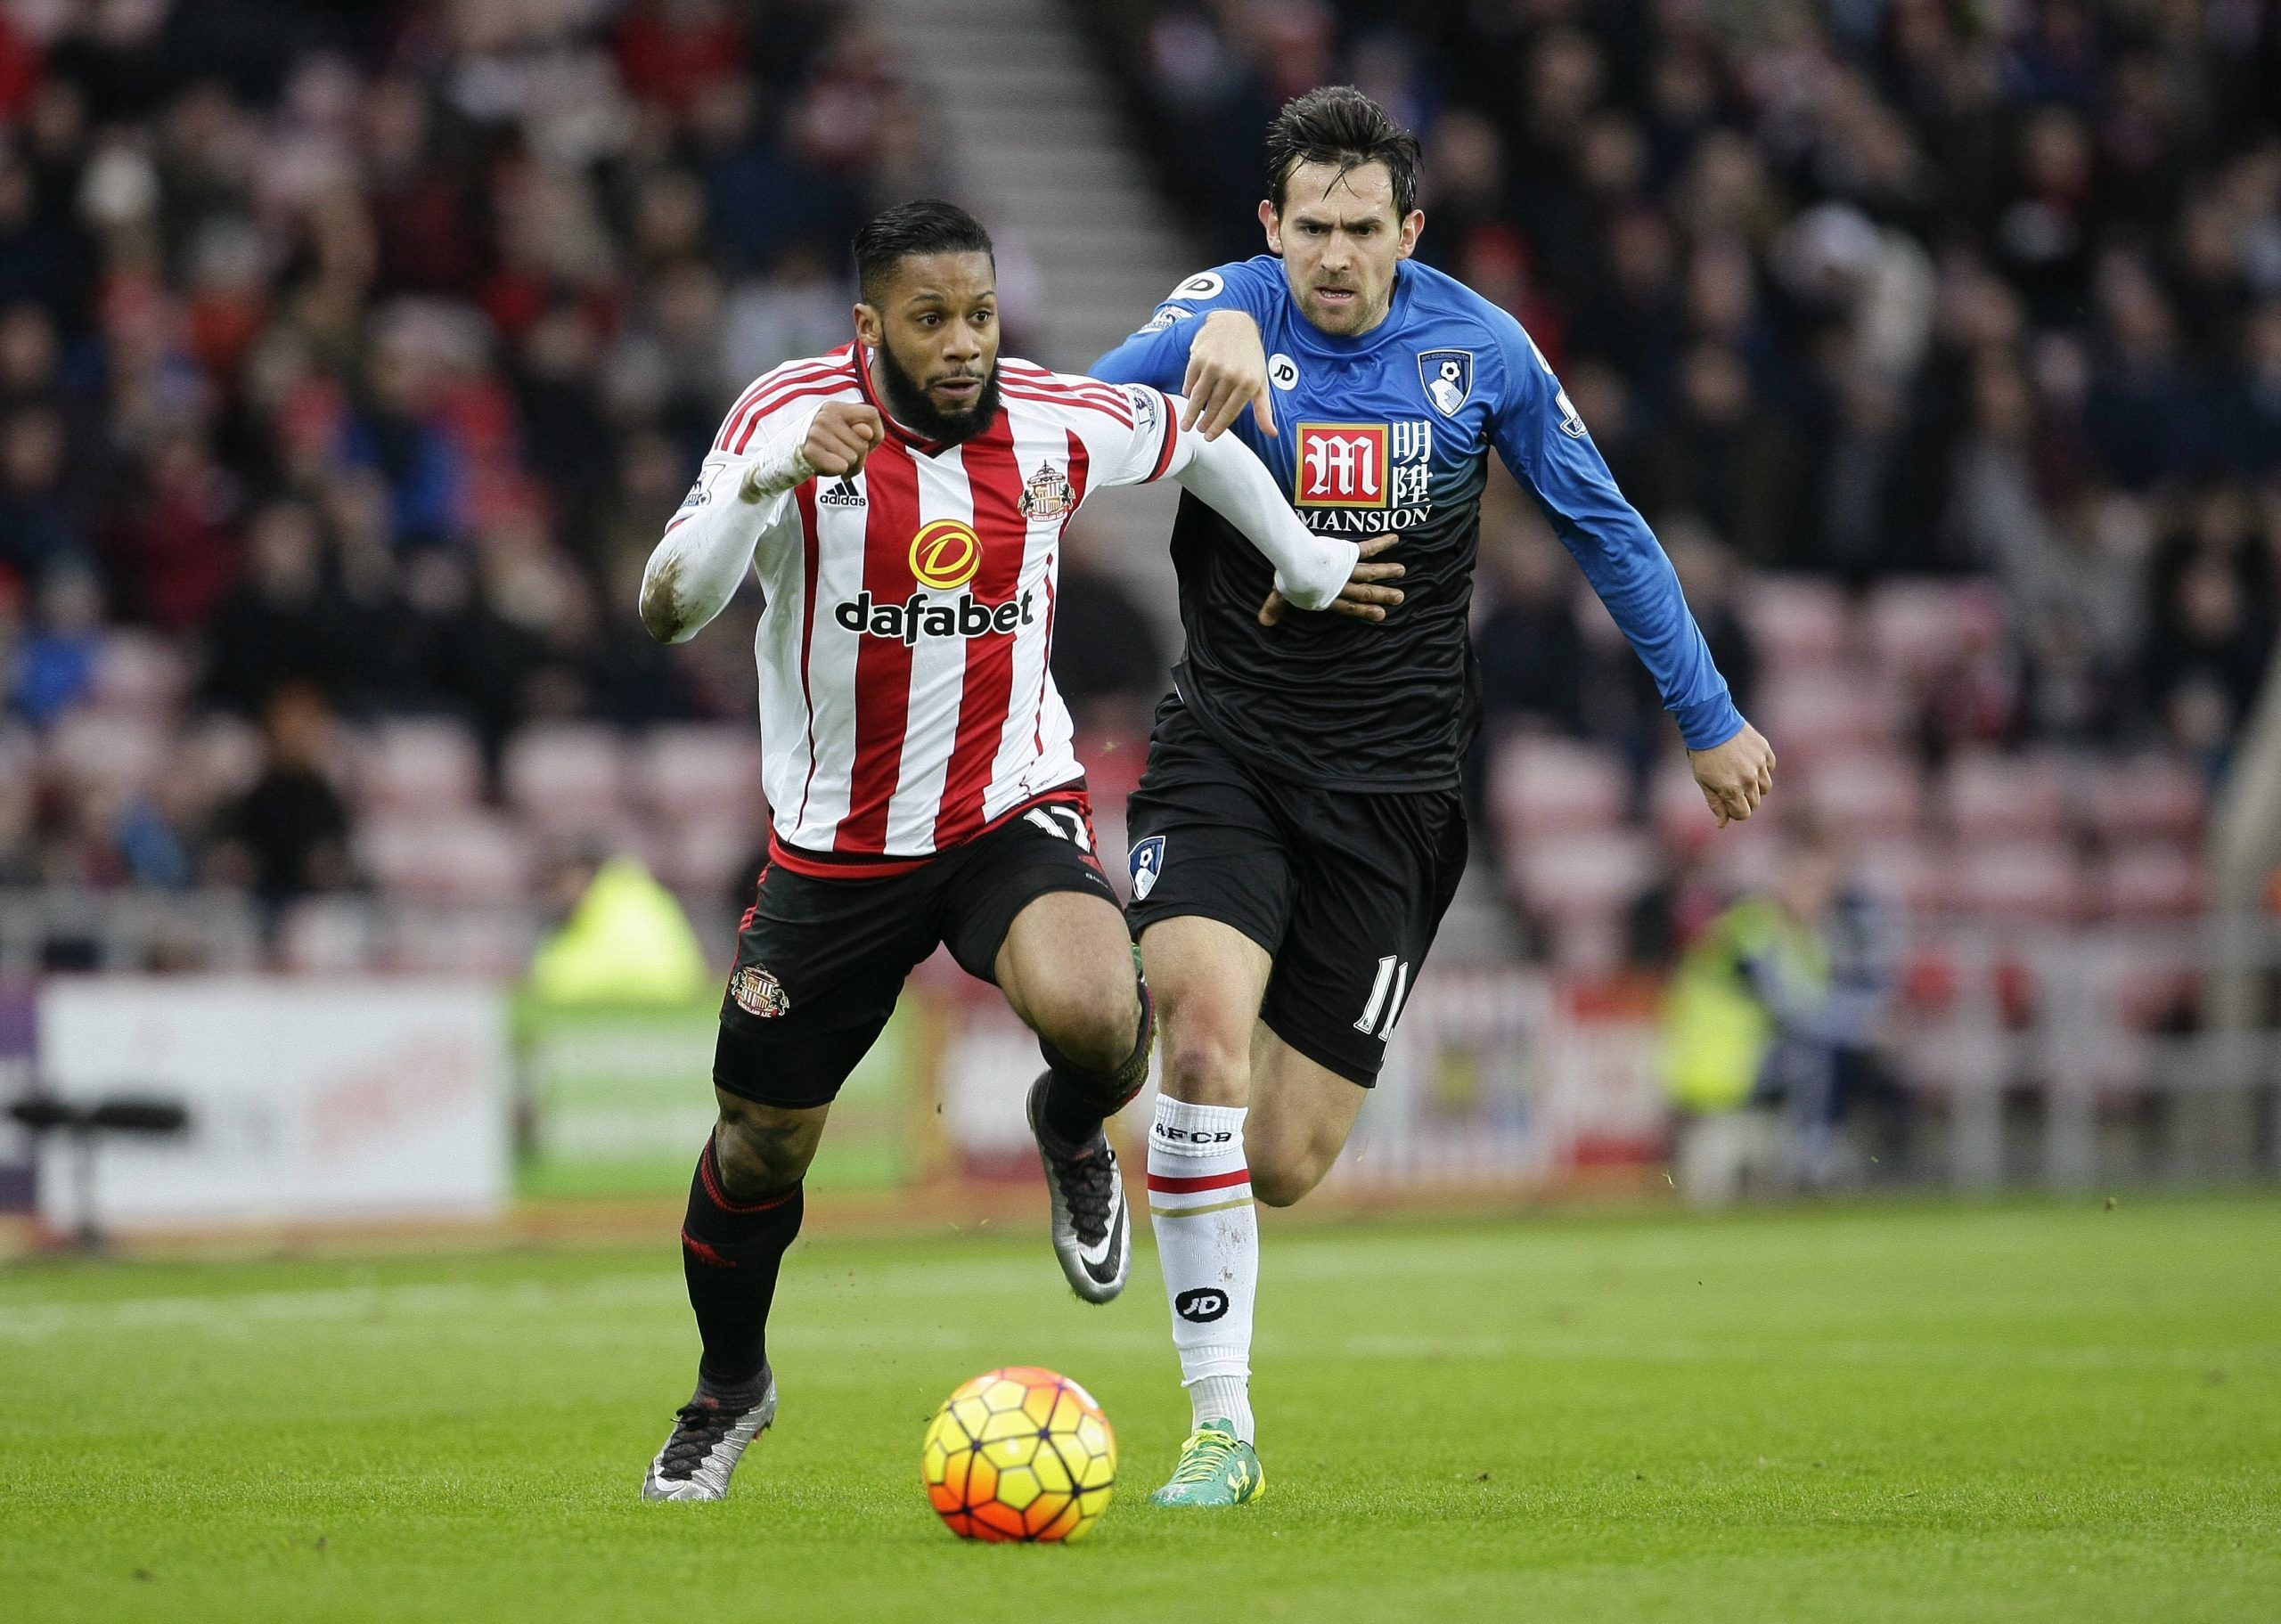 Football Soccer - Sunderland v AFC Bournemouth - Barclays Premier League - Stadium of Light - 23/1/16 
Sunderland's Jeremain Lens in action with Bournemouth's Charlie Daniels 
Action Images via Reuters / Craig Brough 
Livepic 
EDITORIAL USE ONLY. No use with unauthorized audio, video, data, fixture lists, club/league logos or 